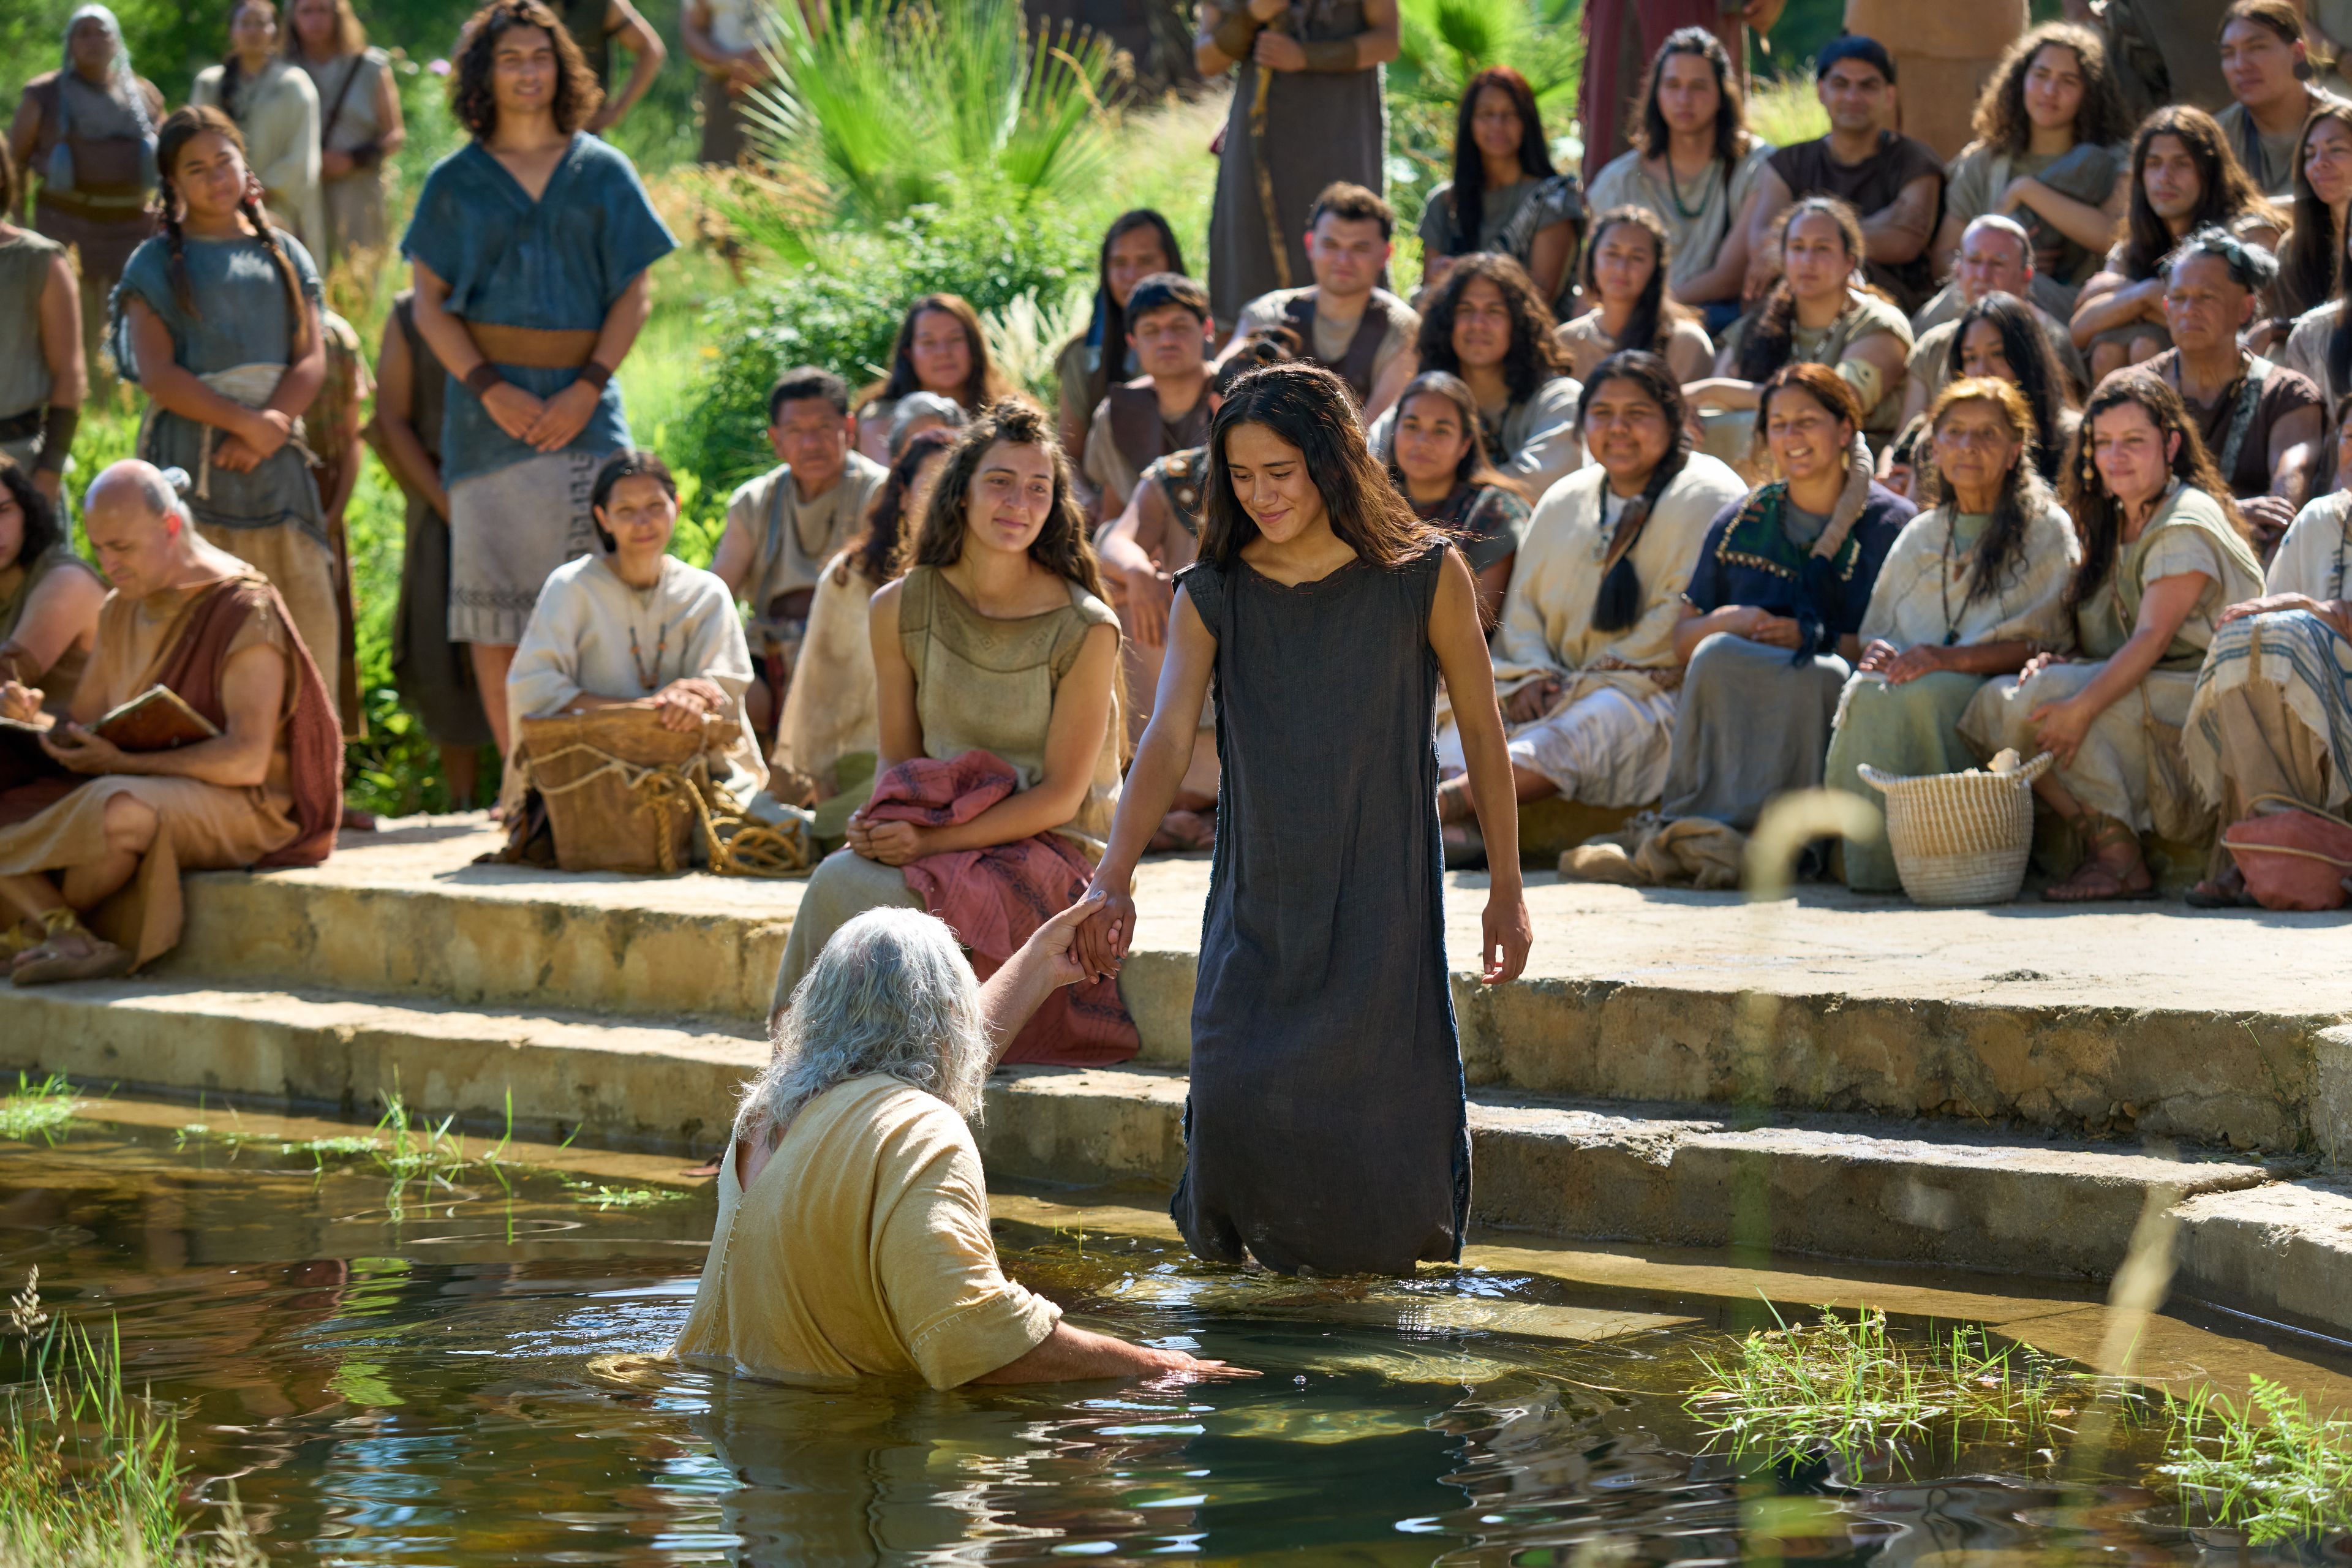 Nephi helps a woman walk down into the water to be baptized. He had previously been set apart and given the authority by the resurrected Savior, Jesus Christ.